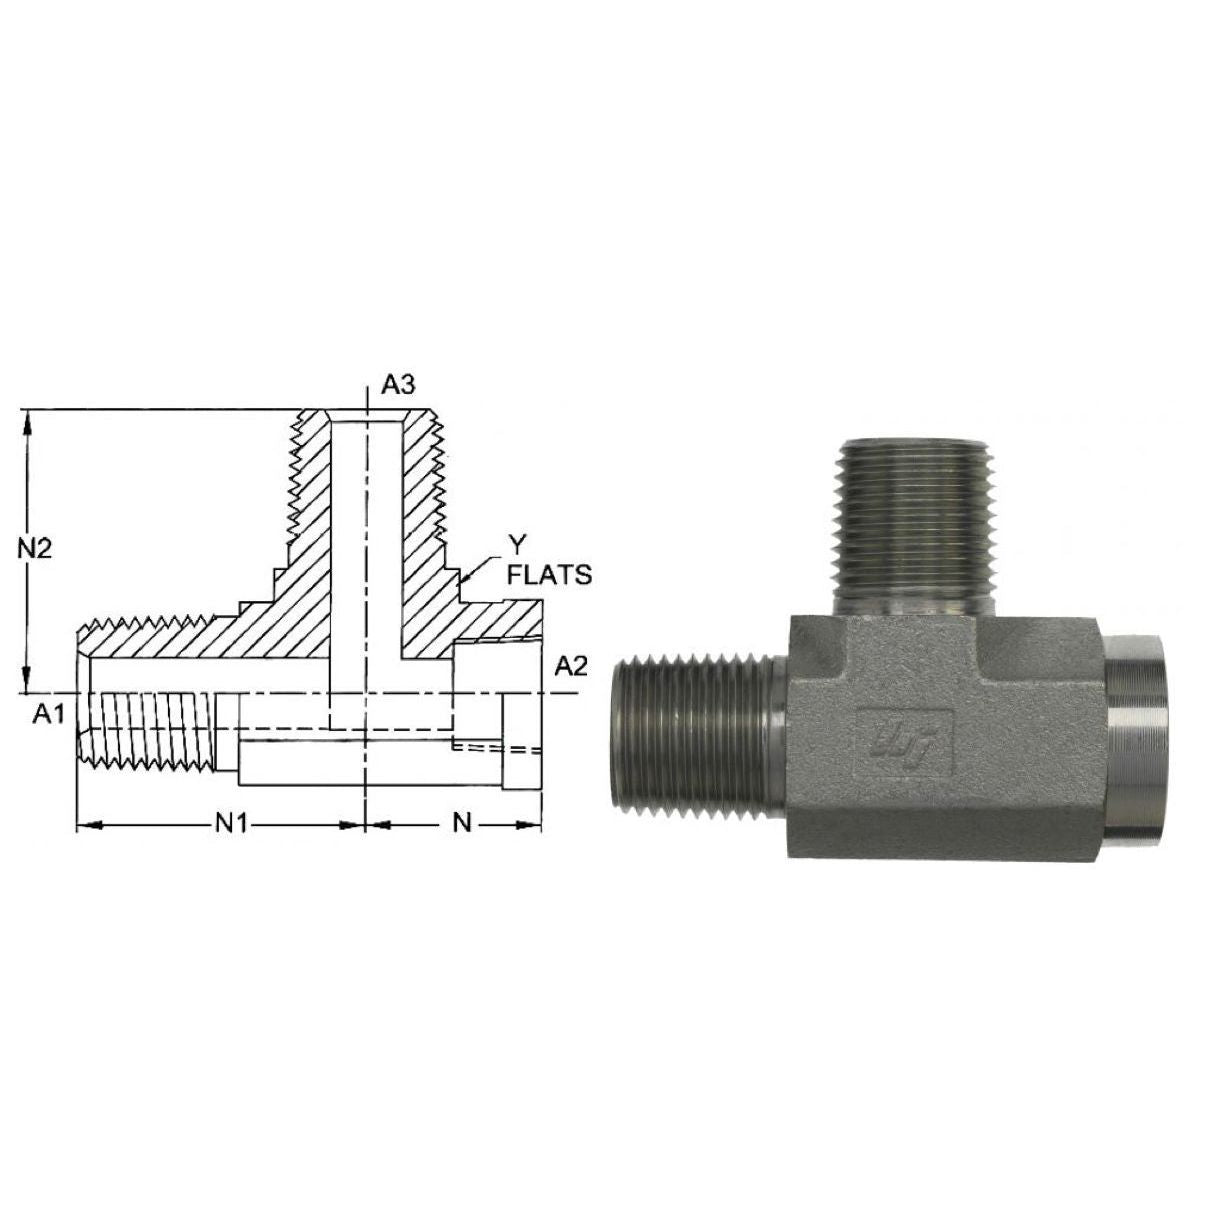 5603-06-06-06-SS : OneHydraulics Tee, 0.375 (3/8) Male NPT x 0.375 (3/8) Female NPT x 0.375 (3/8) Male NPT, Stainless Steel, 6000psi